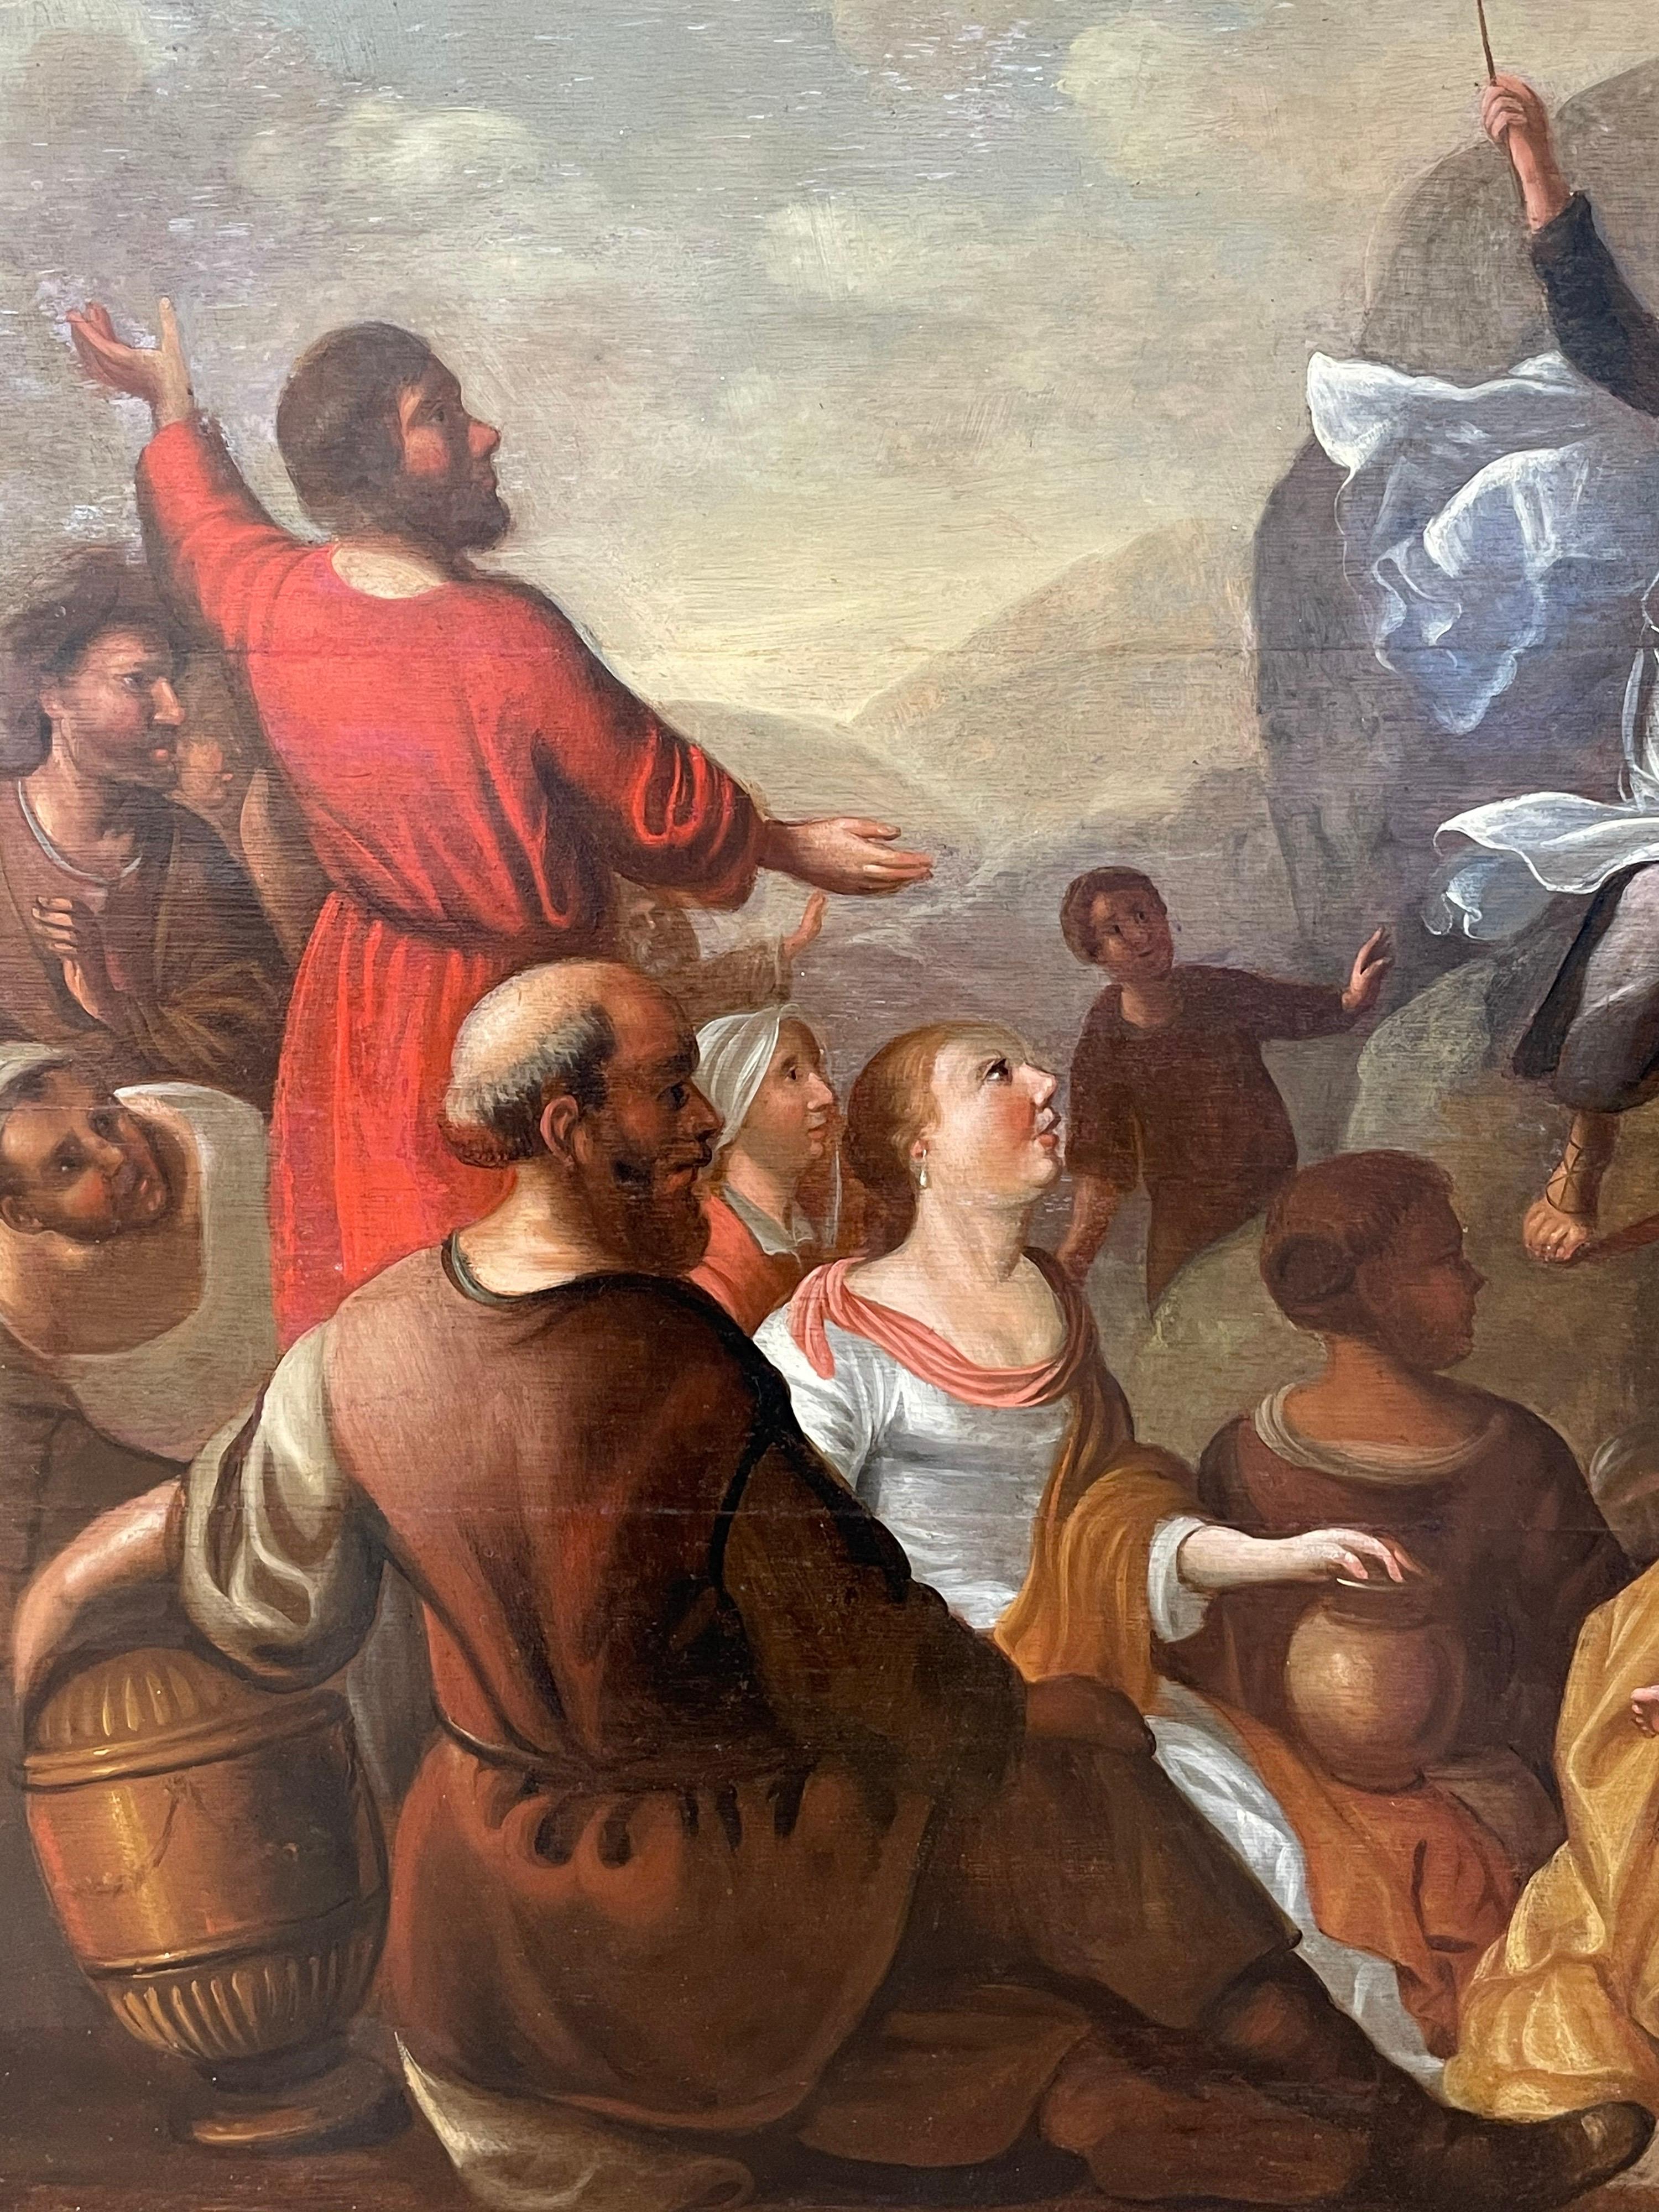 Moses Striking the Rock
Dutch School, early 1700's
oil painting on wood panel (three conjoined panels), framed
panel: 30 x 43 inches
framed: 37.5 x 51 inches
provenance: private collection, England
condition: very good and presentable; as with any